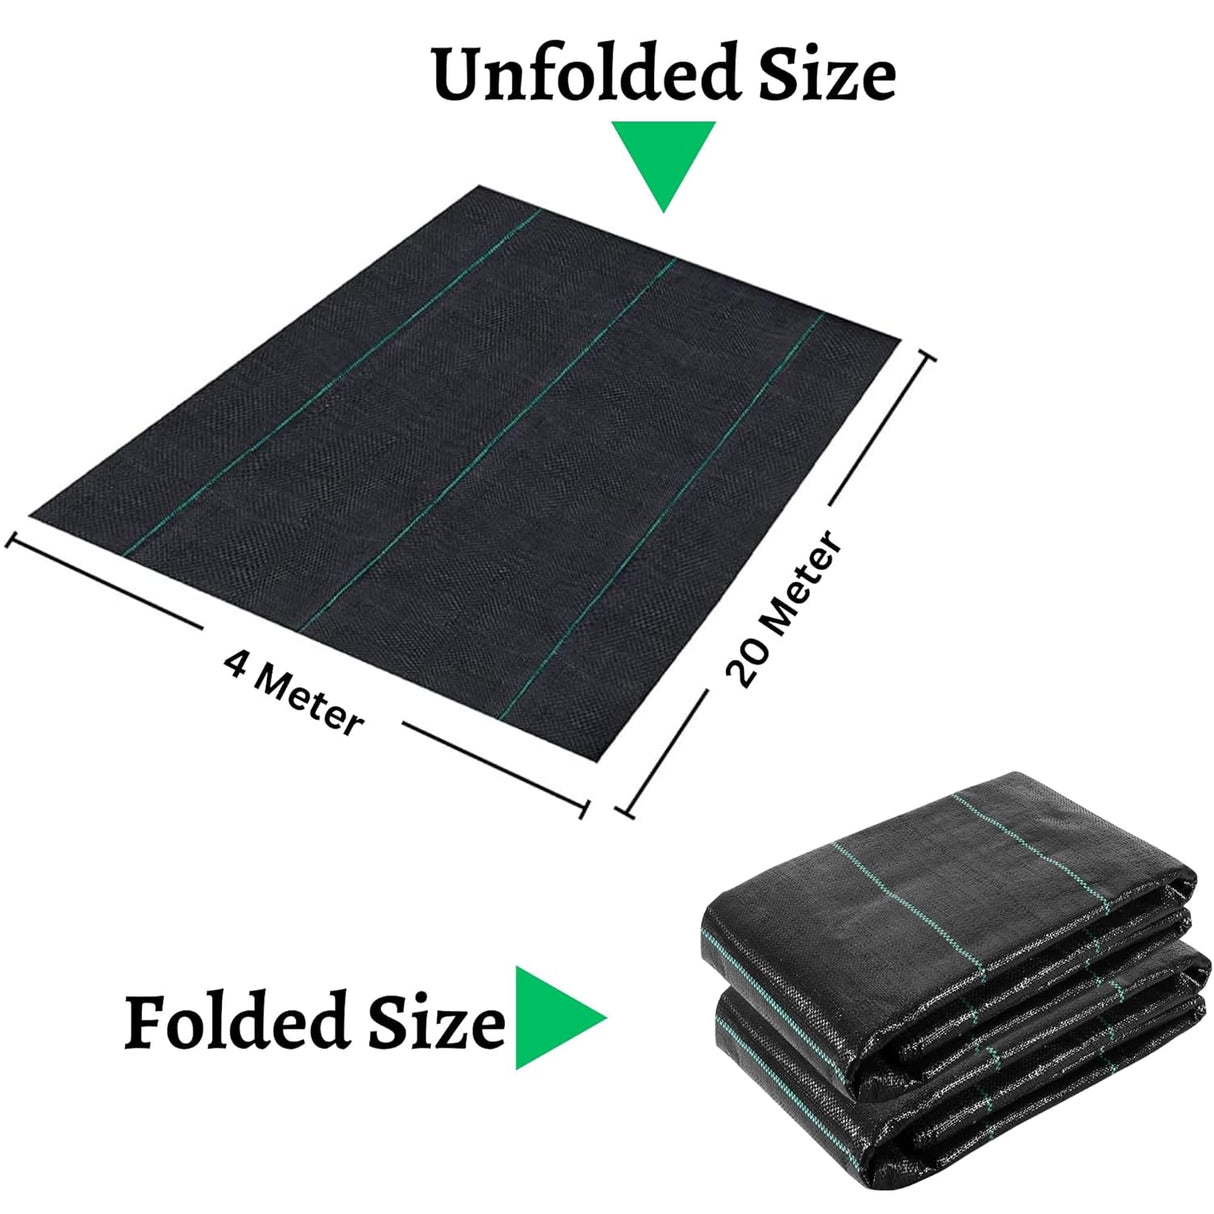 Singhal Premium Garden Weed Control Barrier Sheet Mat 4 Meter x 20 Meter, Landscape Fabric 110 GSM Heavy Duty Gardening Mat for Gardens, Agriculture, Outdoor Projects (Black)